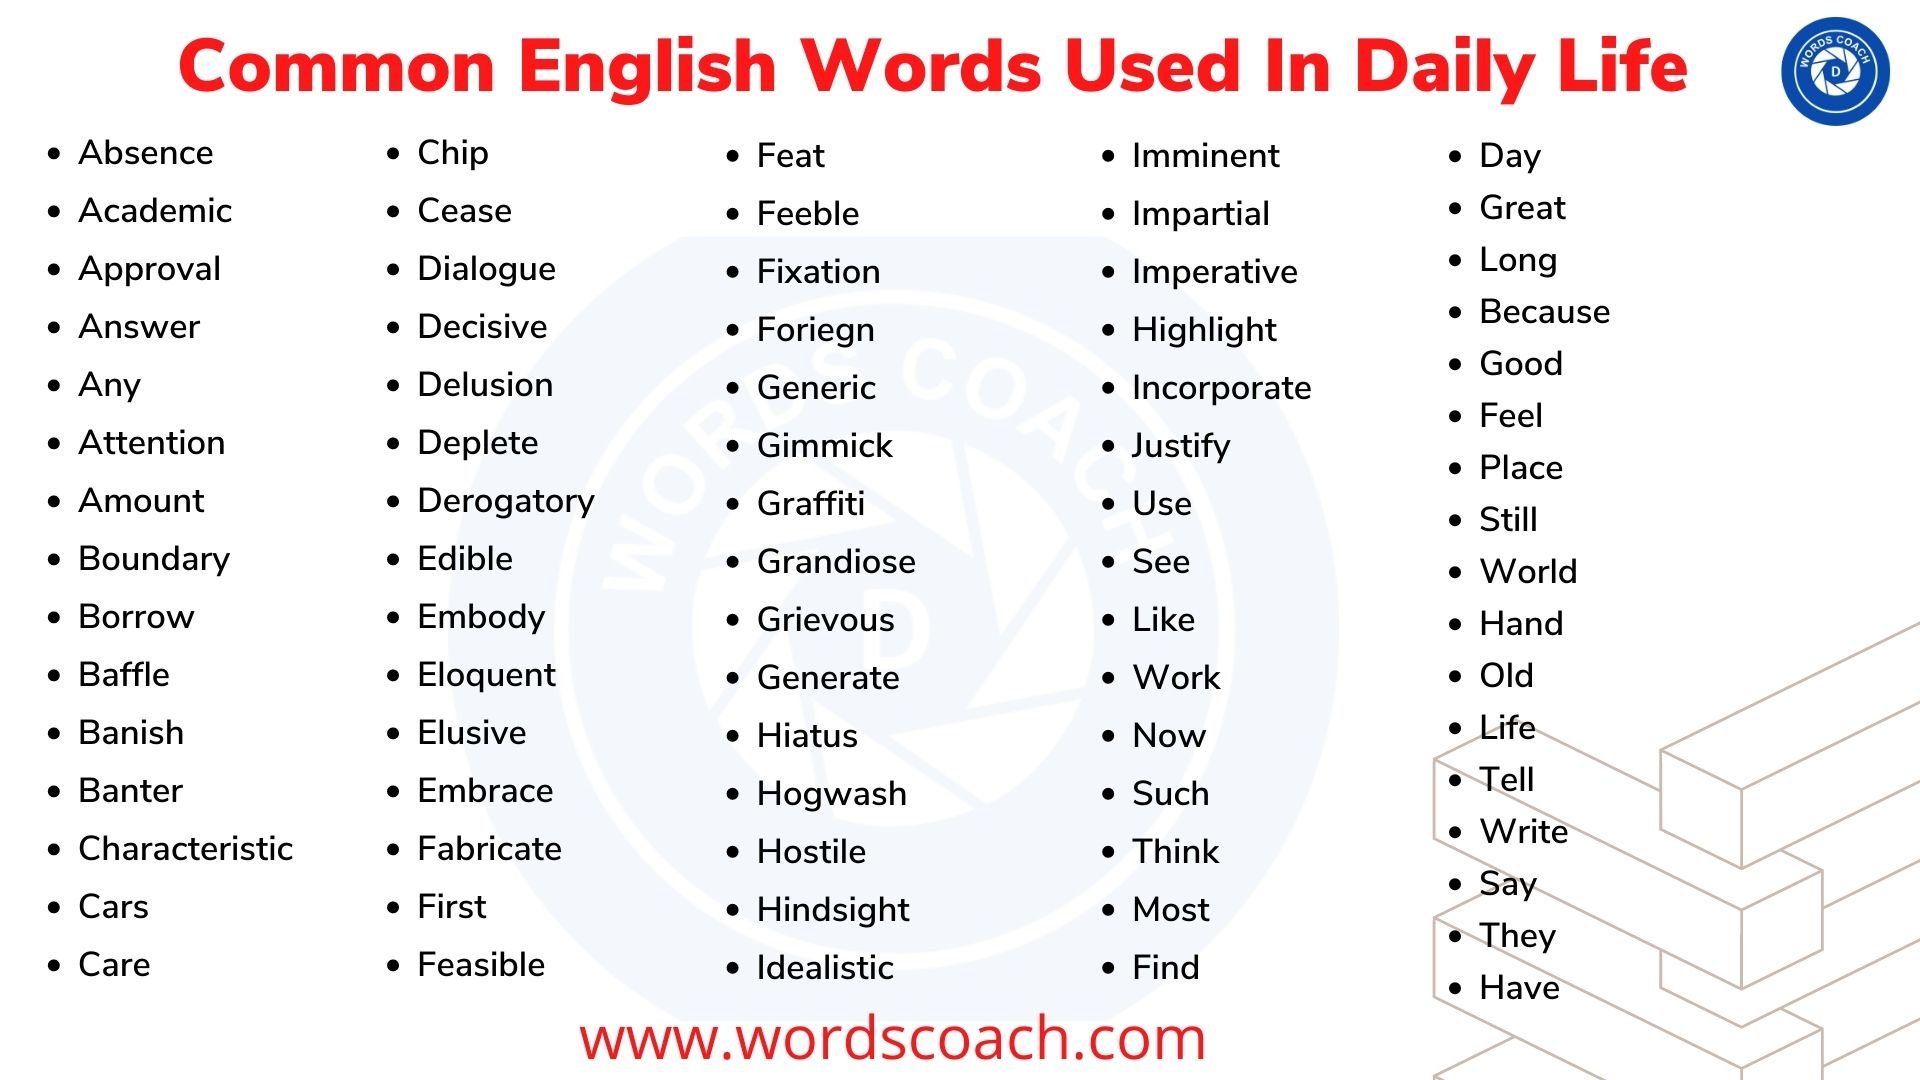 Common English Words Used In Daily Life - wordscoach.com